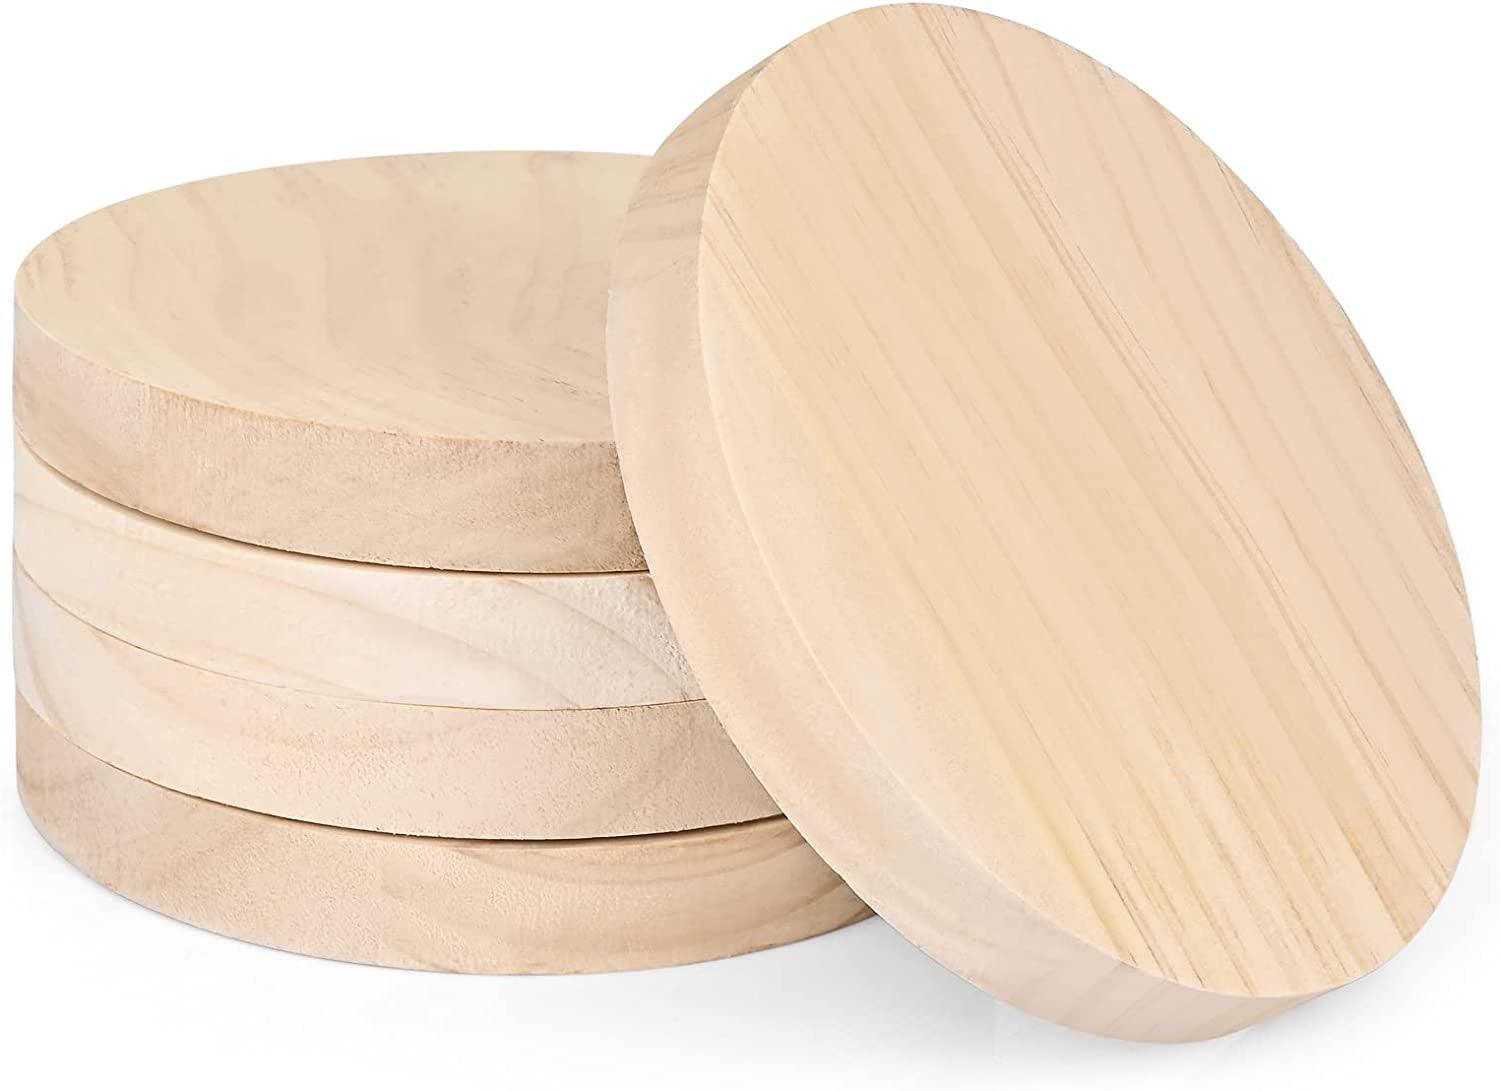 5PCS Unfinished Natural Wood Slices-5.9Inch round Wooden Discs Circles - WoodArtSupply